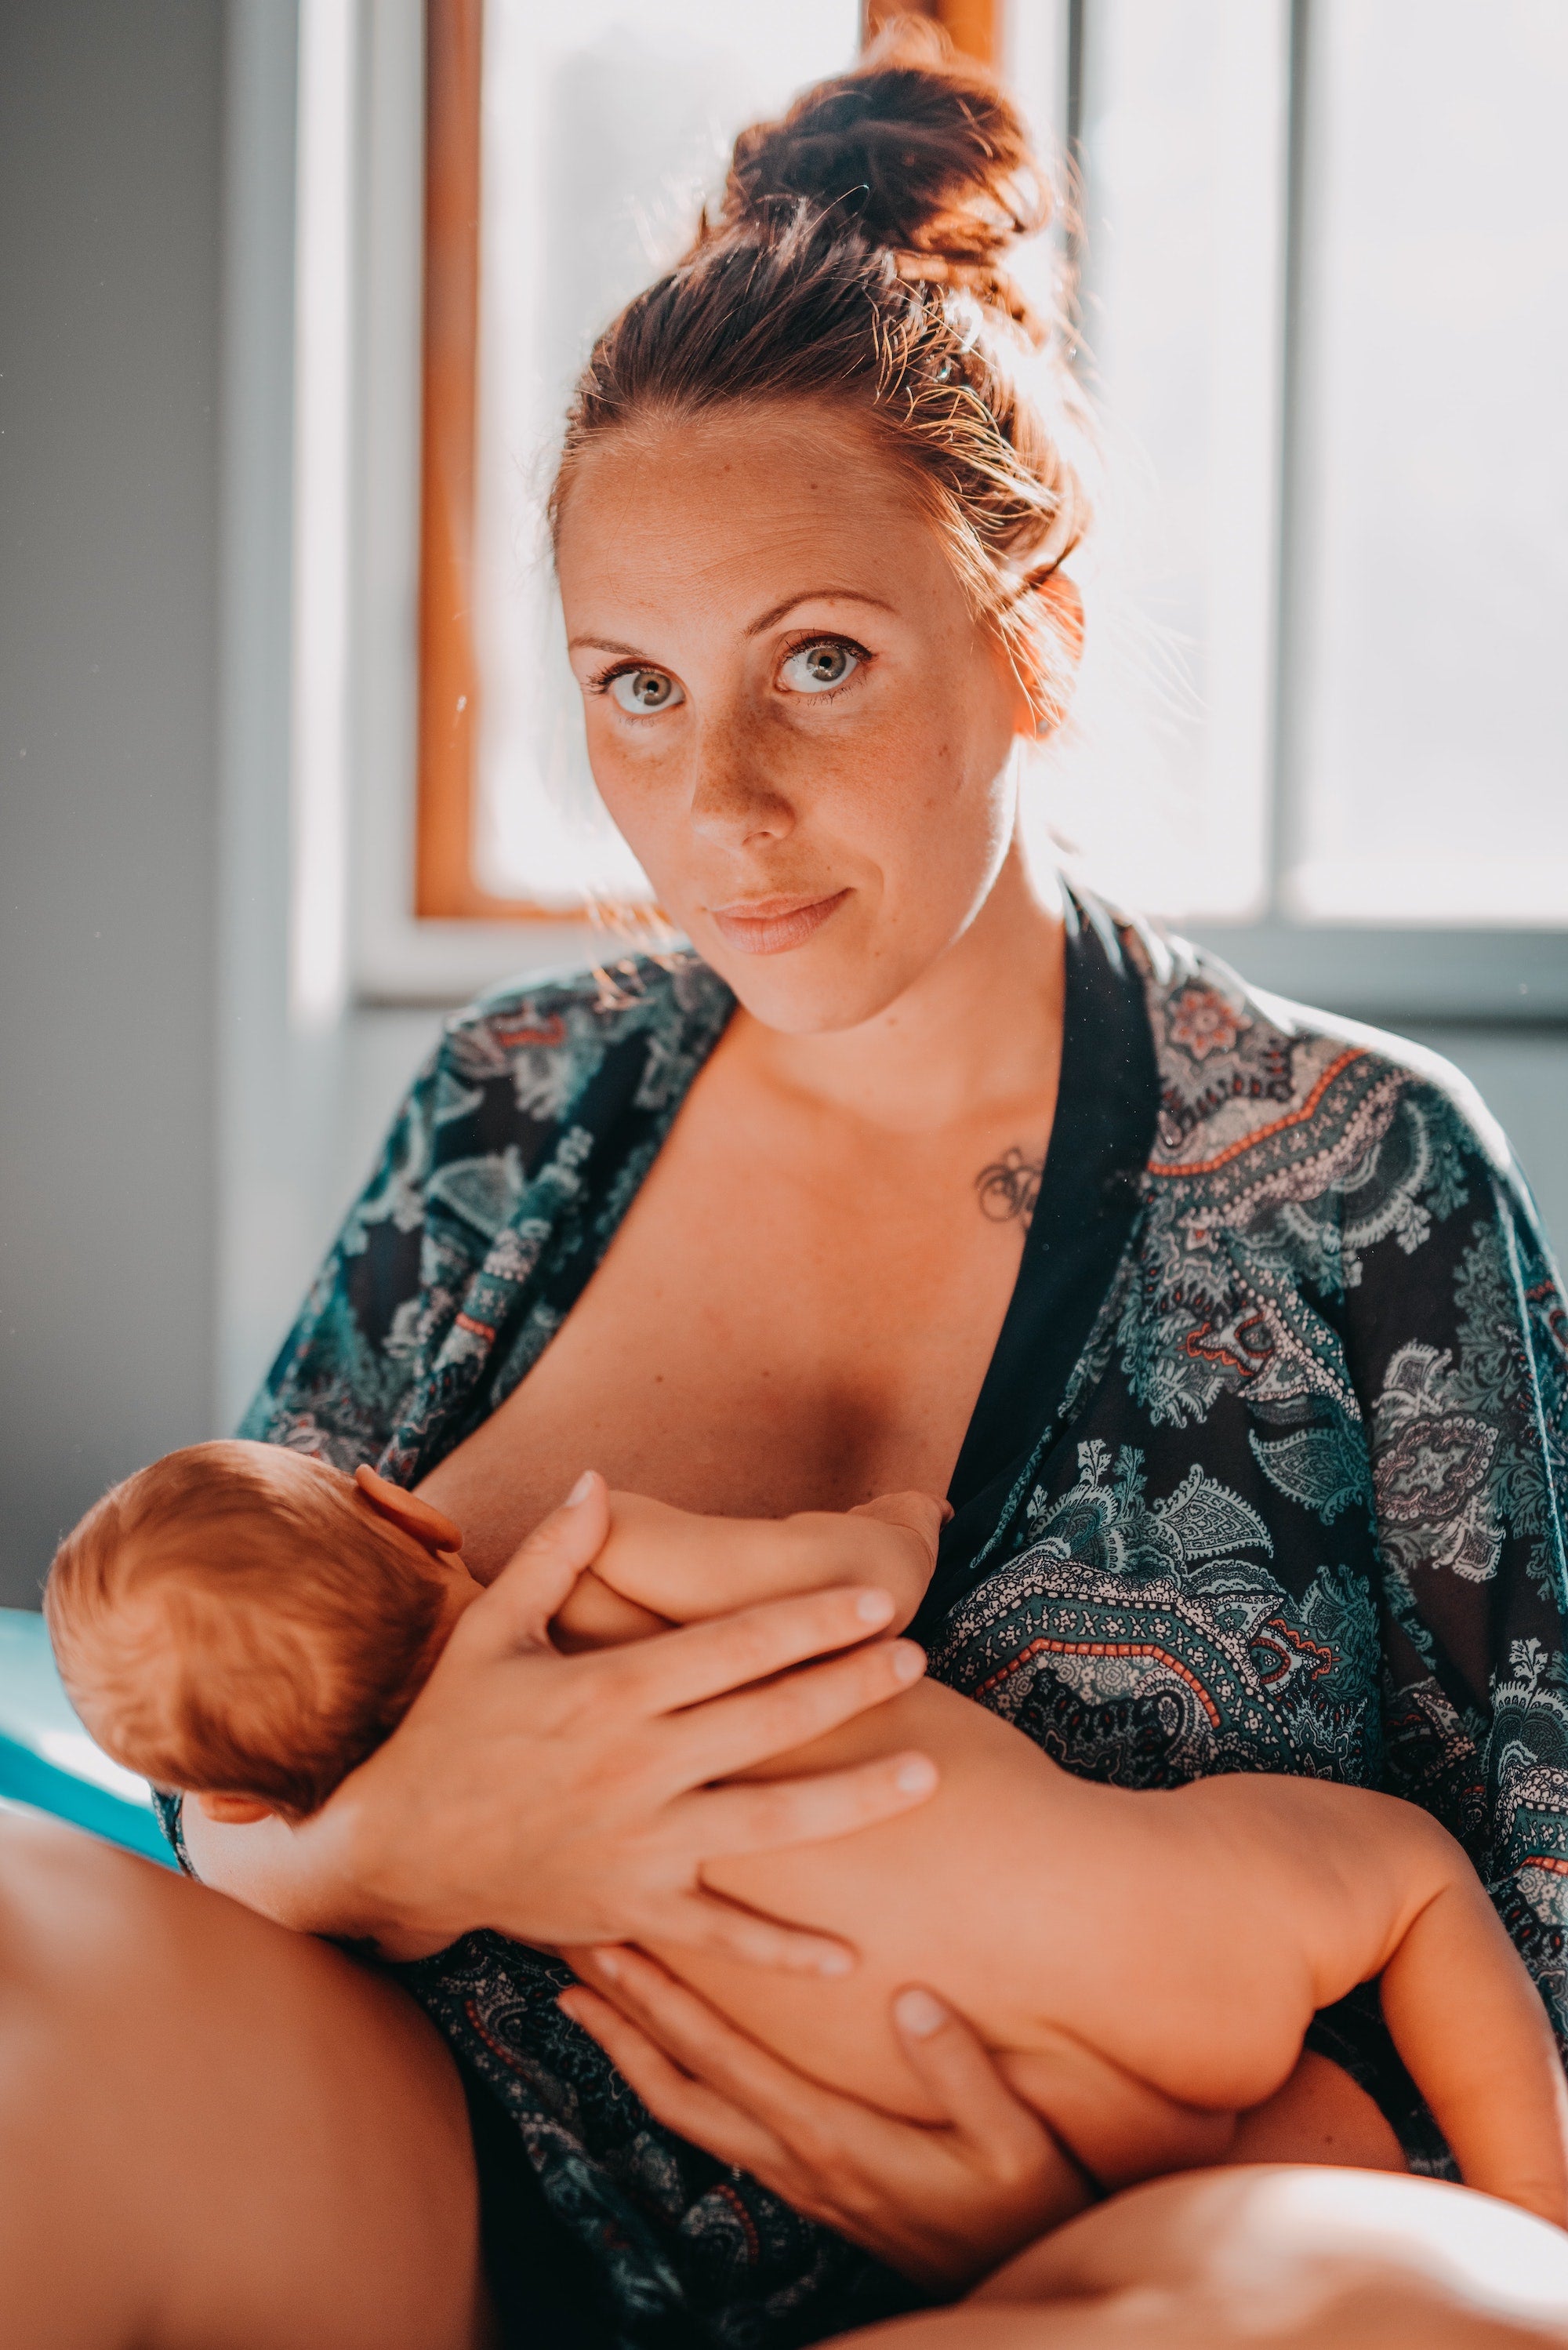 From a Midwife: How to support new mamas; what's helpful + what makes it harder